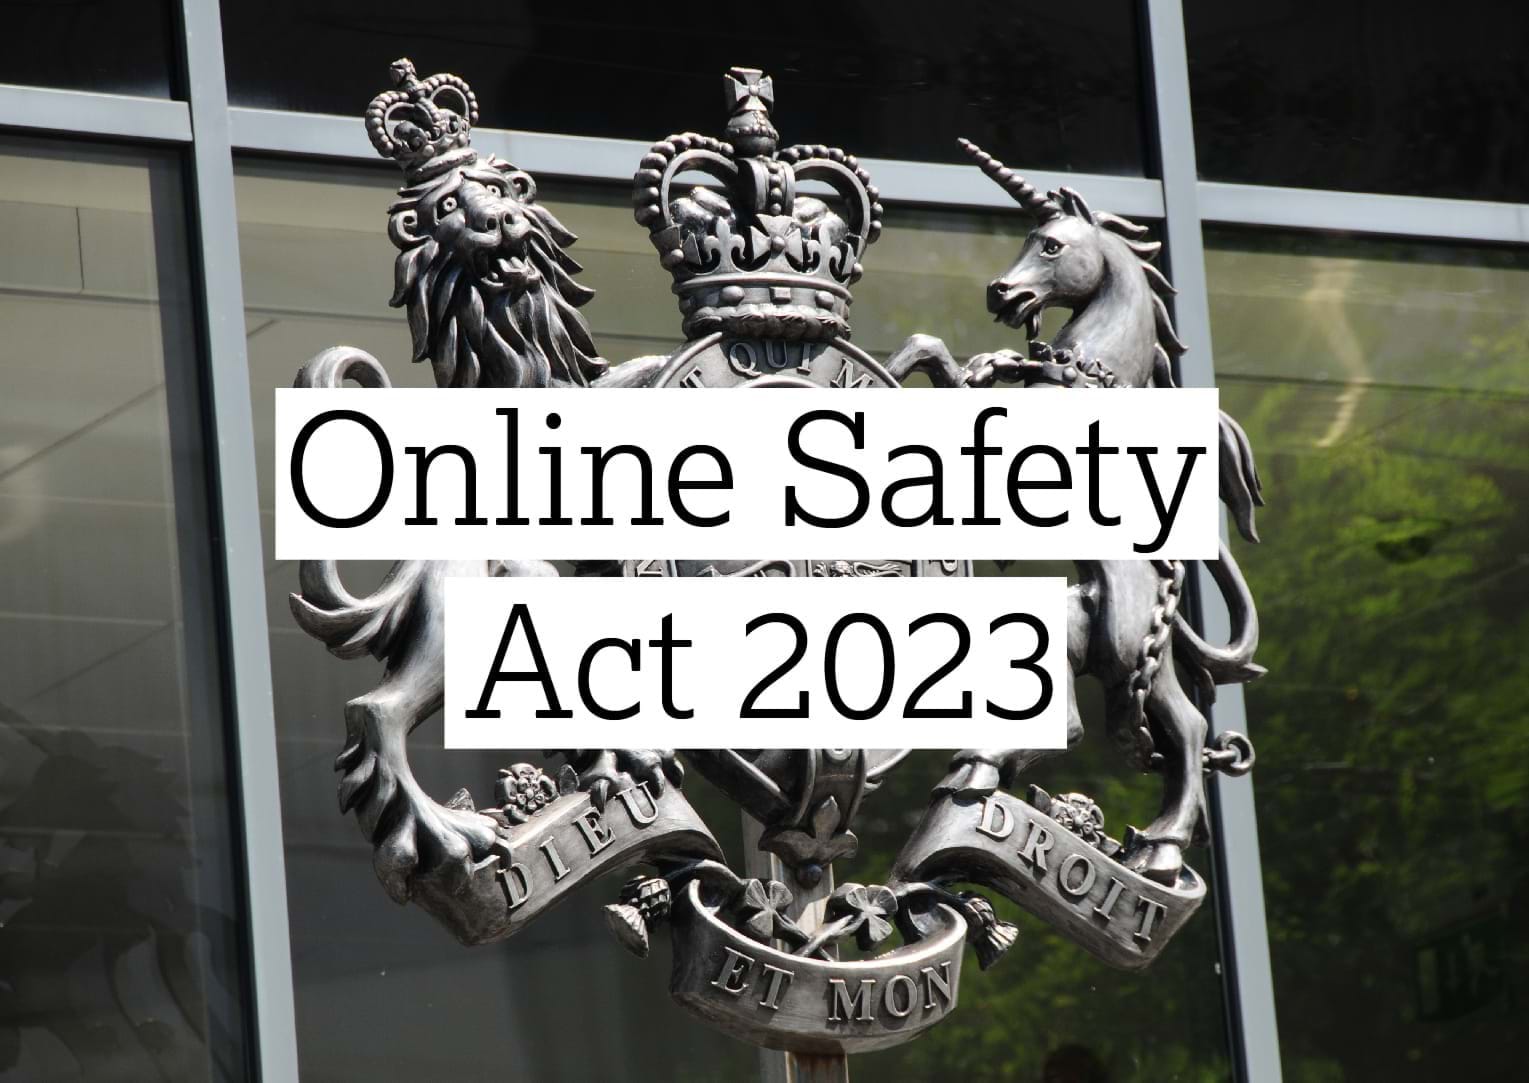 Online Safety Act 2023